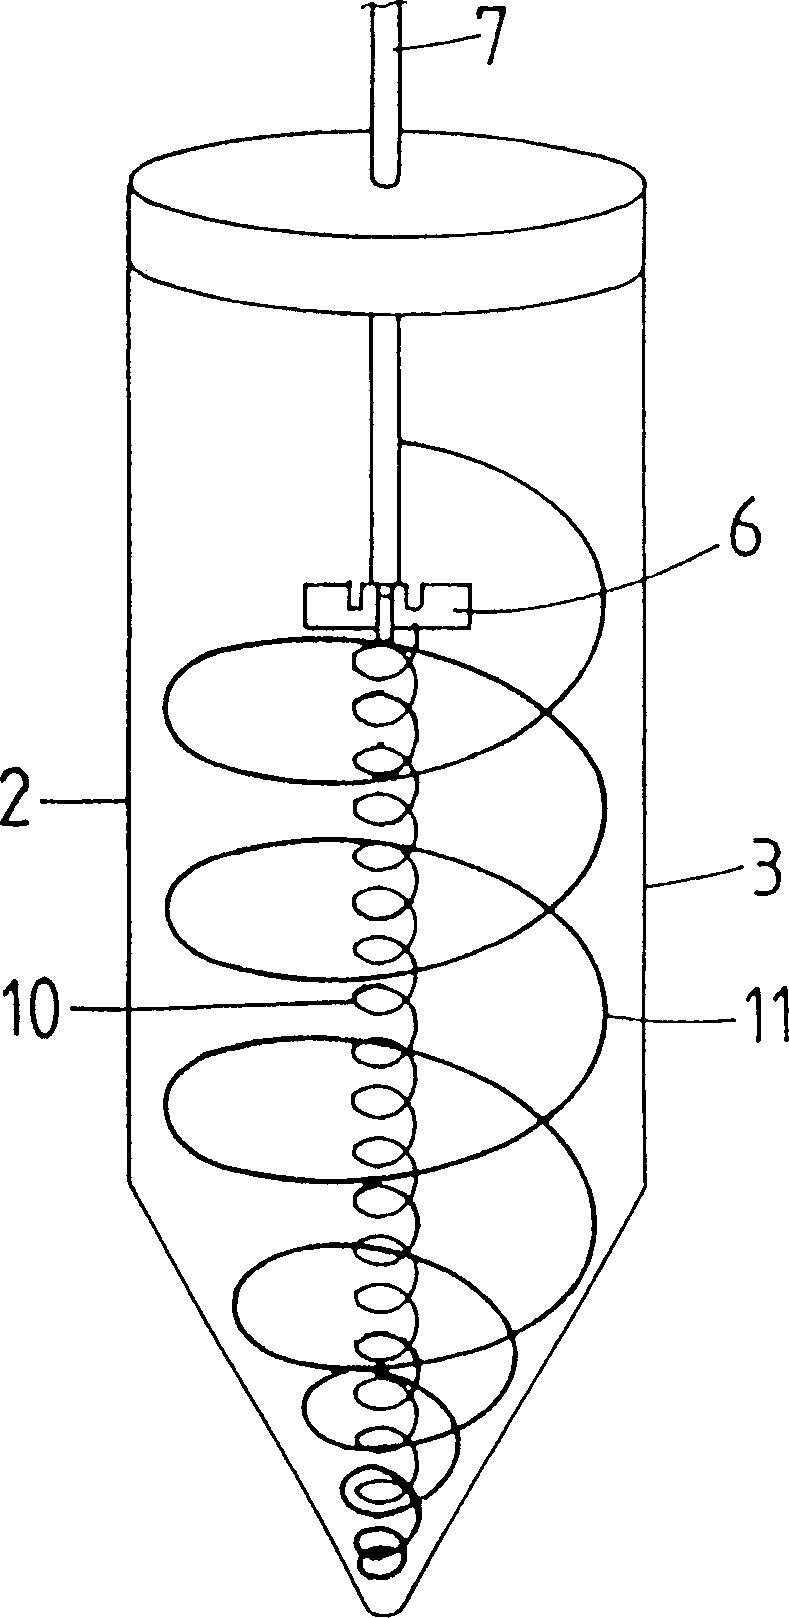 Method and apparatus for mixing